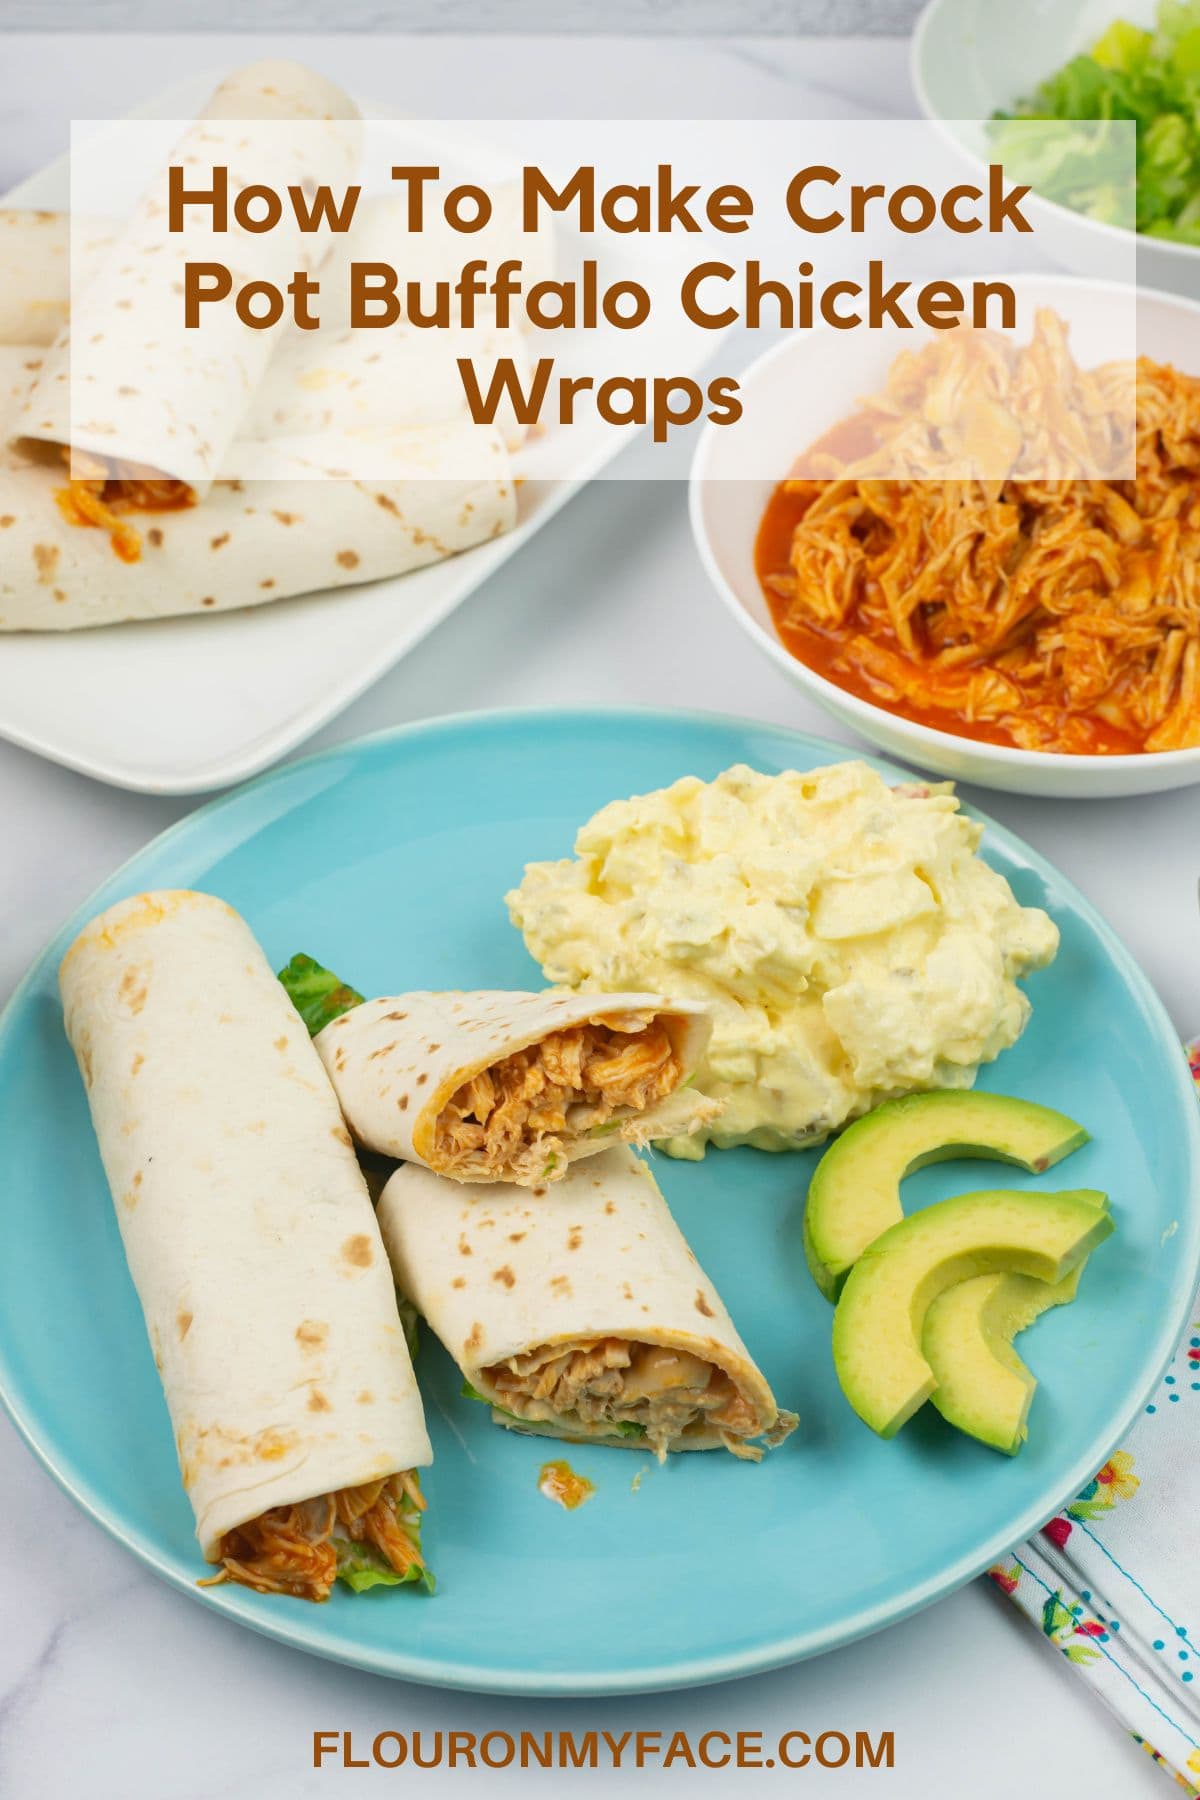 Crock Pot Buffalo Chicken Wraps on a plate served with avocado and potato salad.